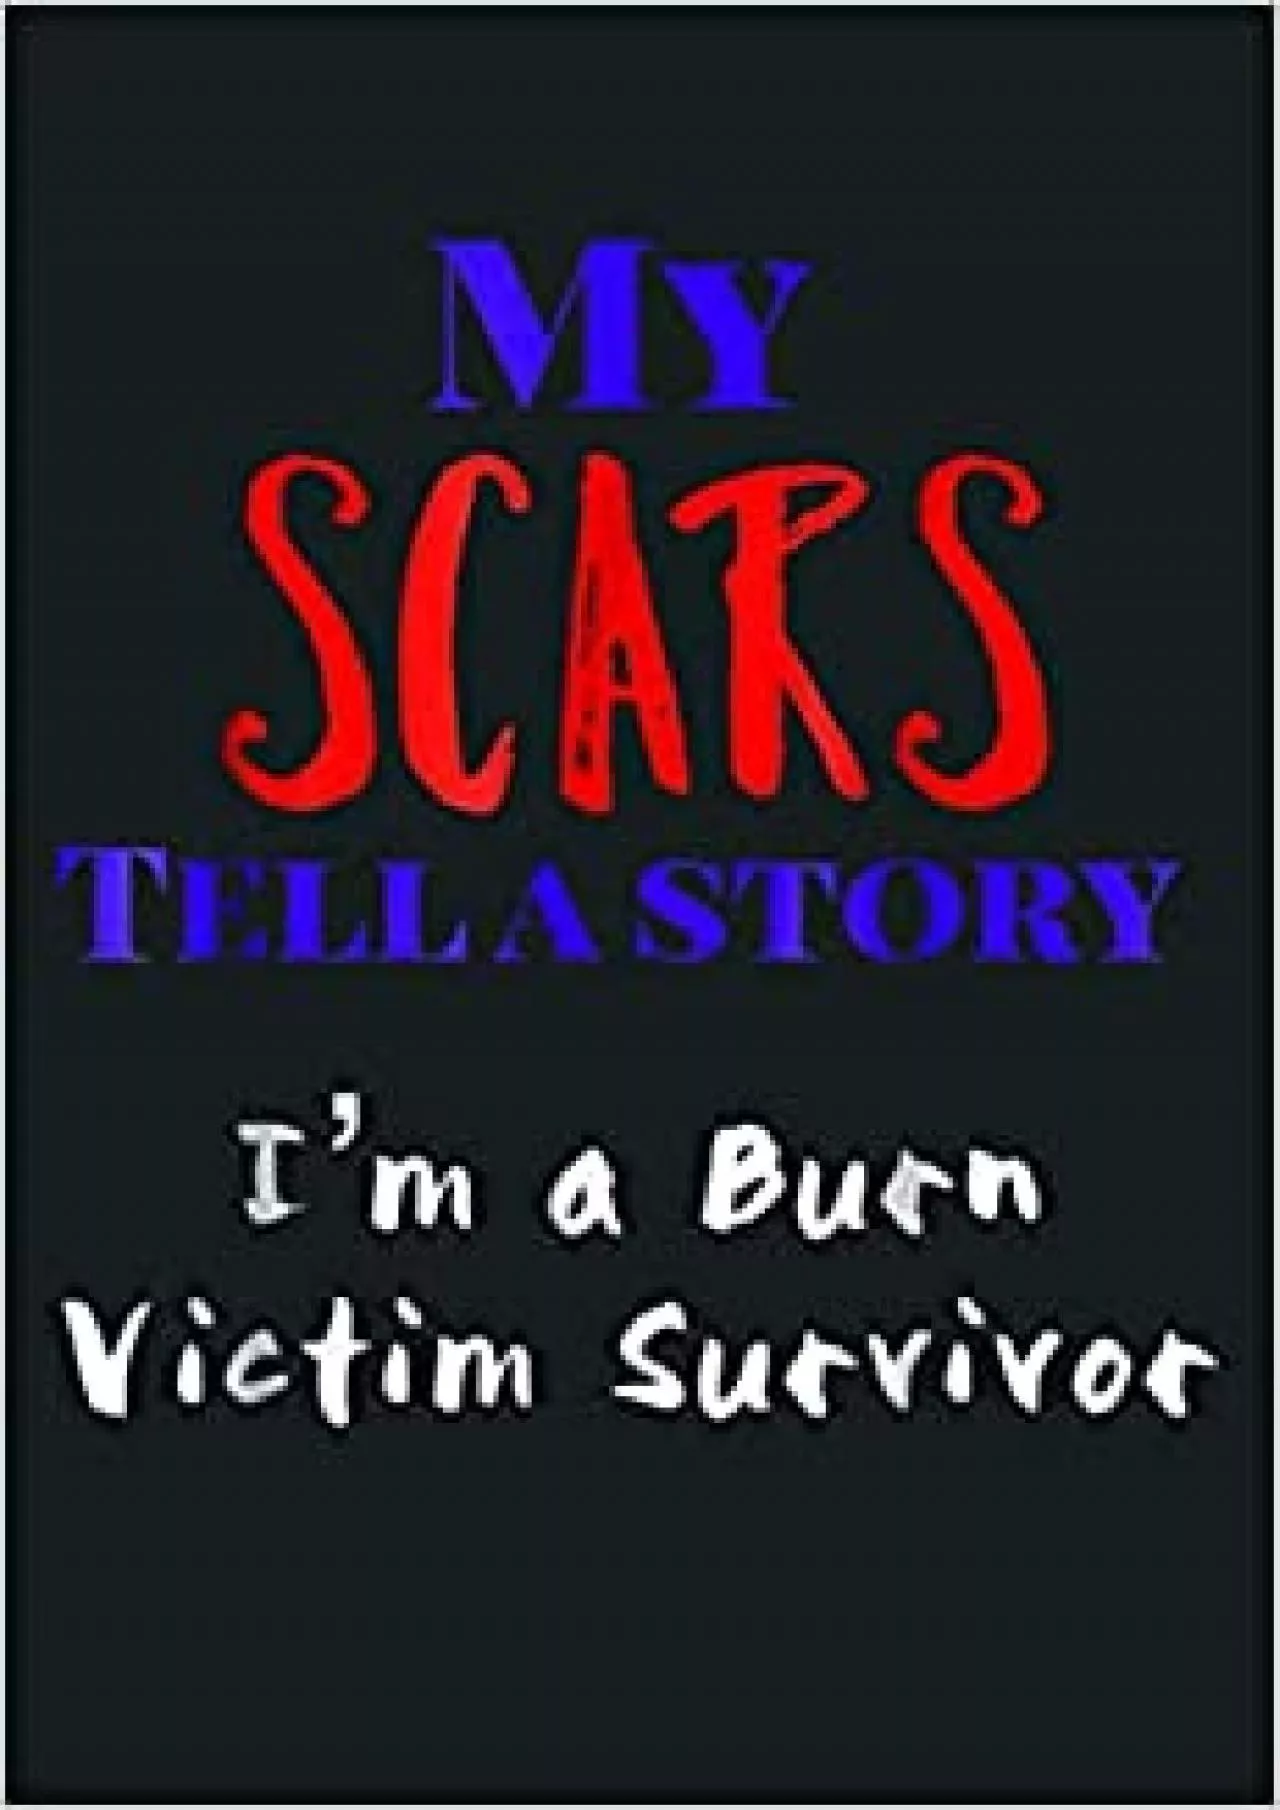 My Scars Show I Survived I M A Burn Victim Survivor: Notebook Planner - 6x9 inch Daily